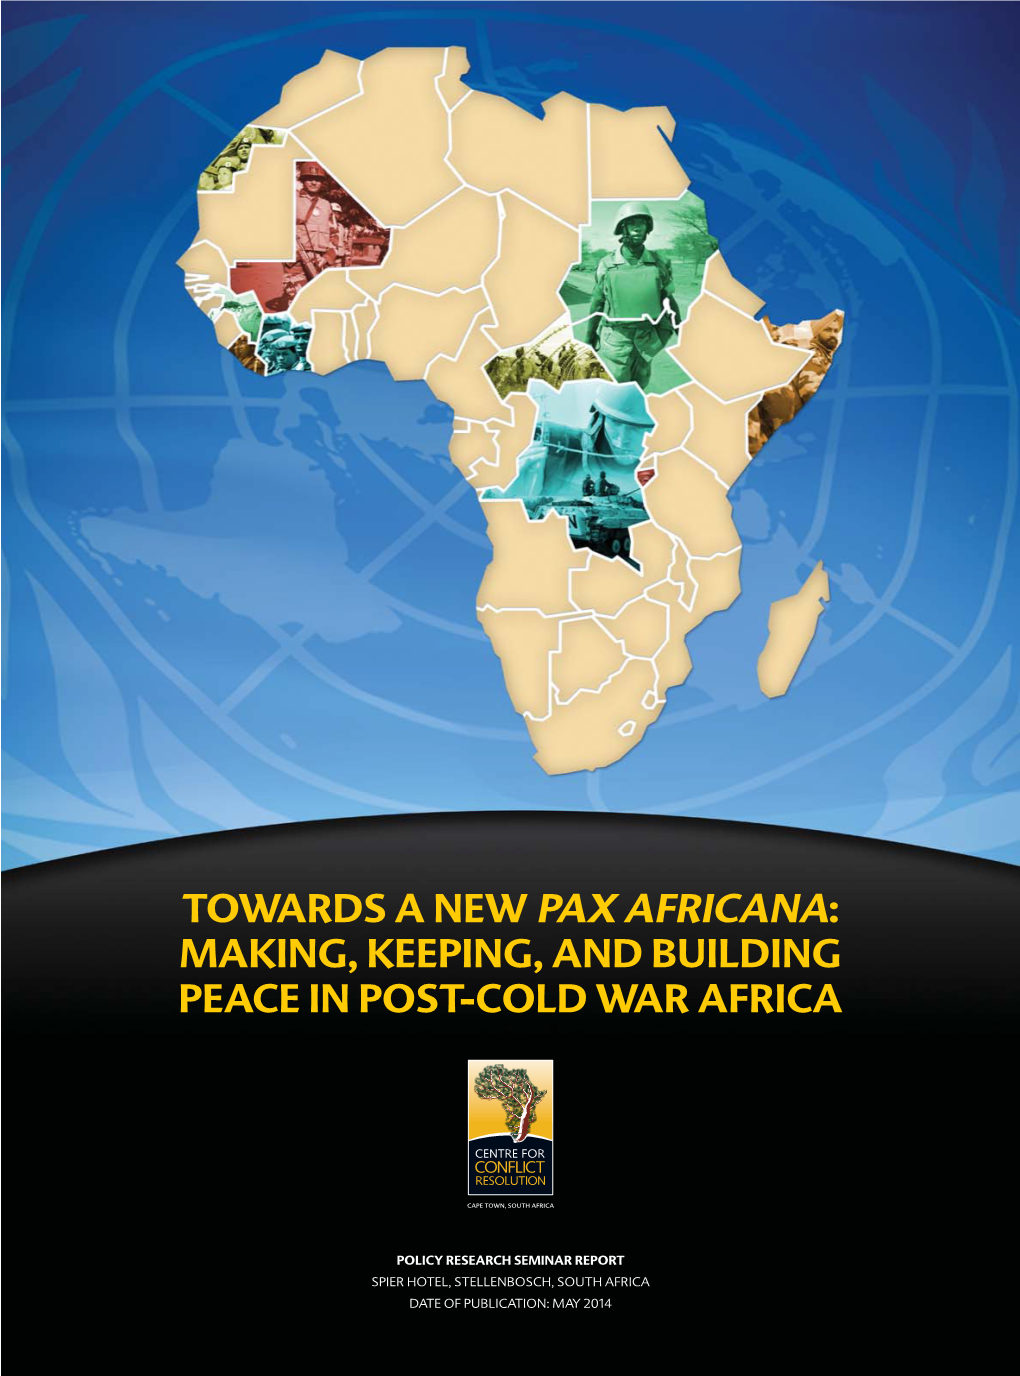 Towards a New Pax Africana: Making, Keeping, and Building Peace in Post-Cold War Africa